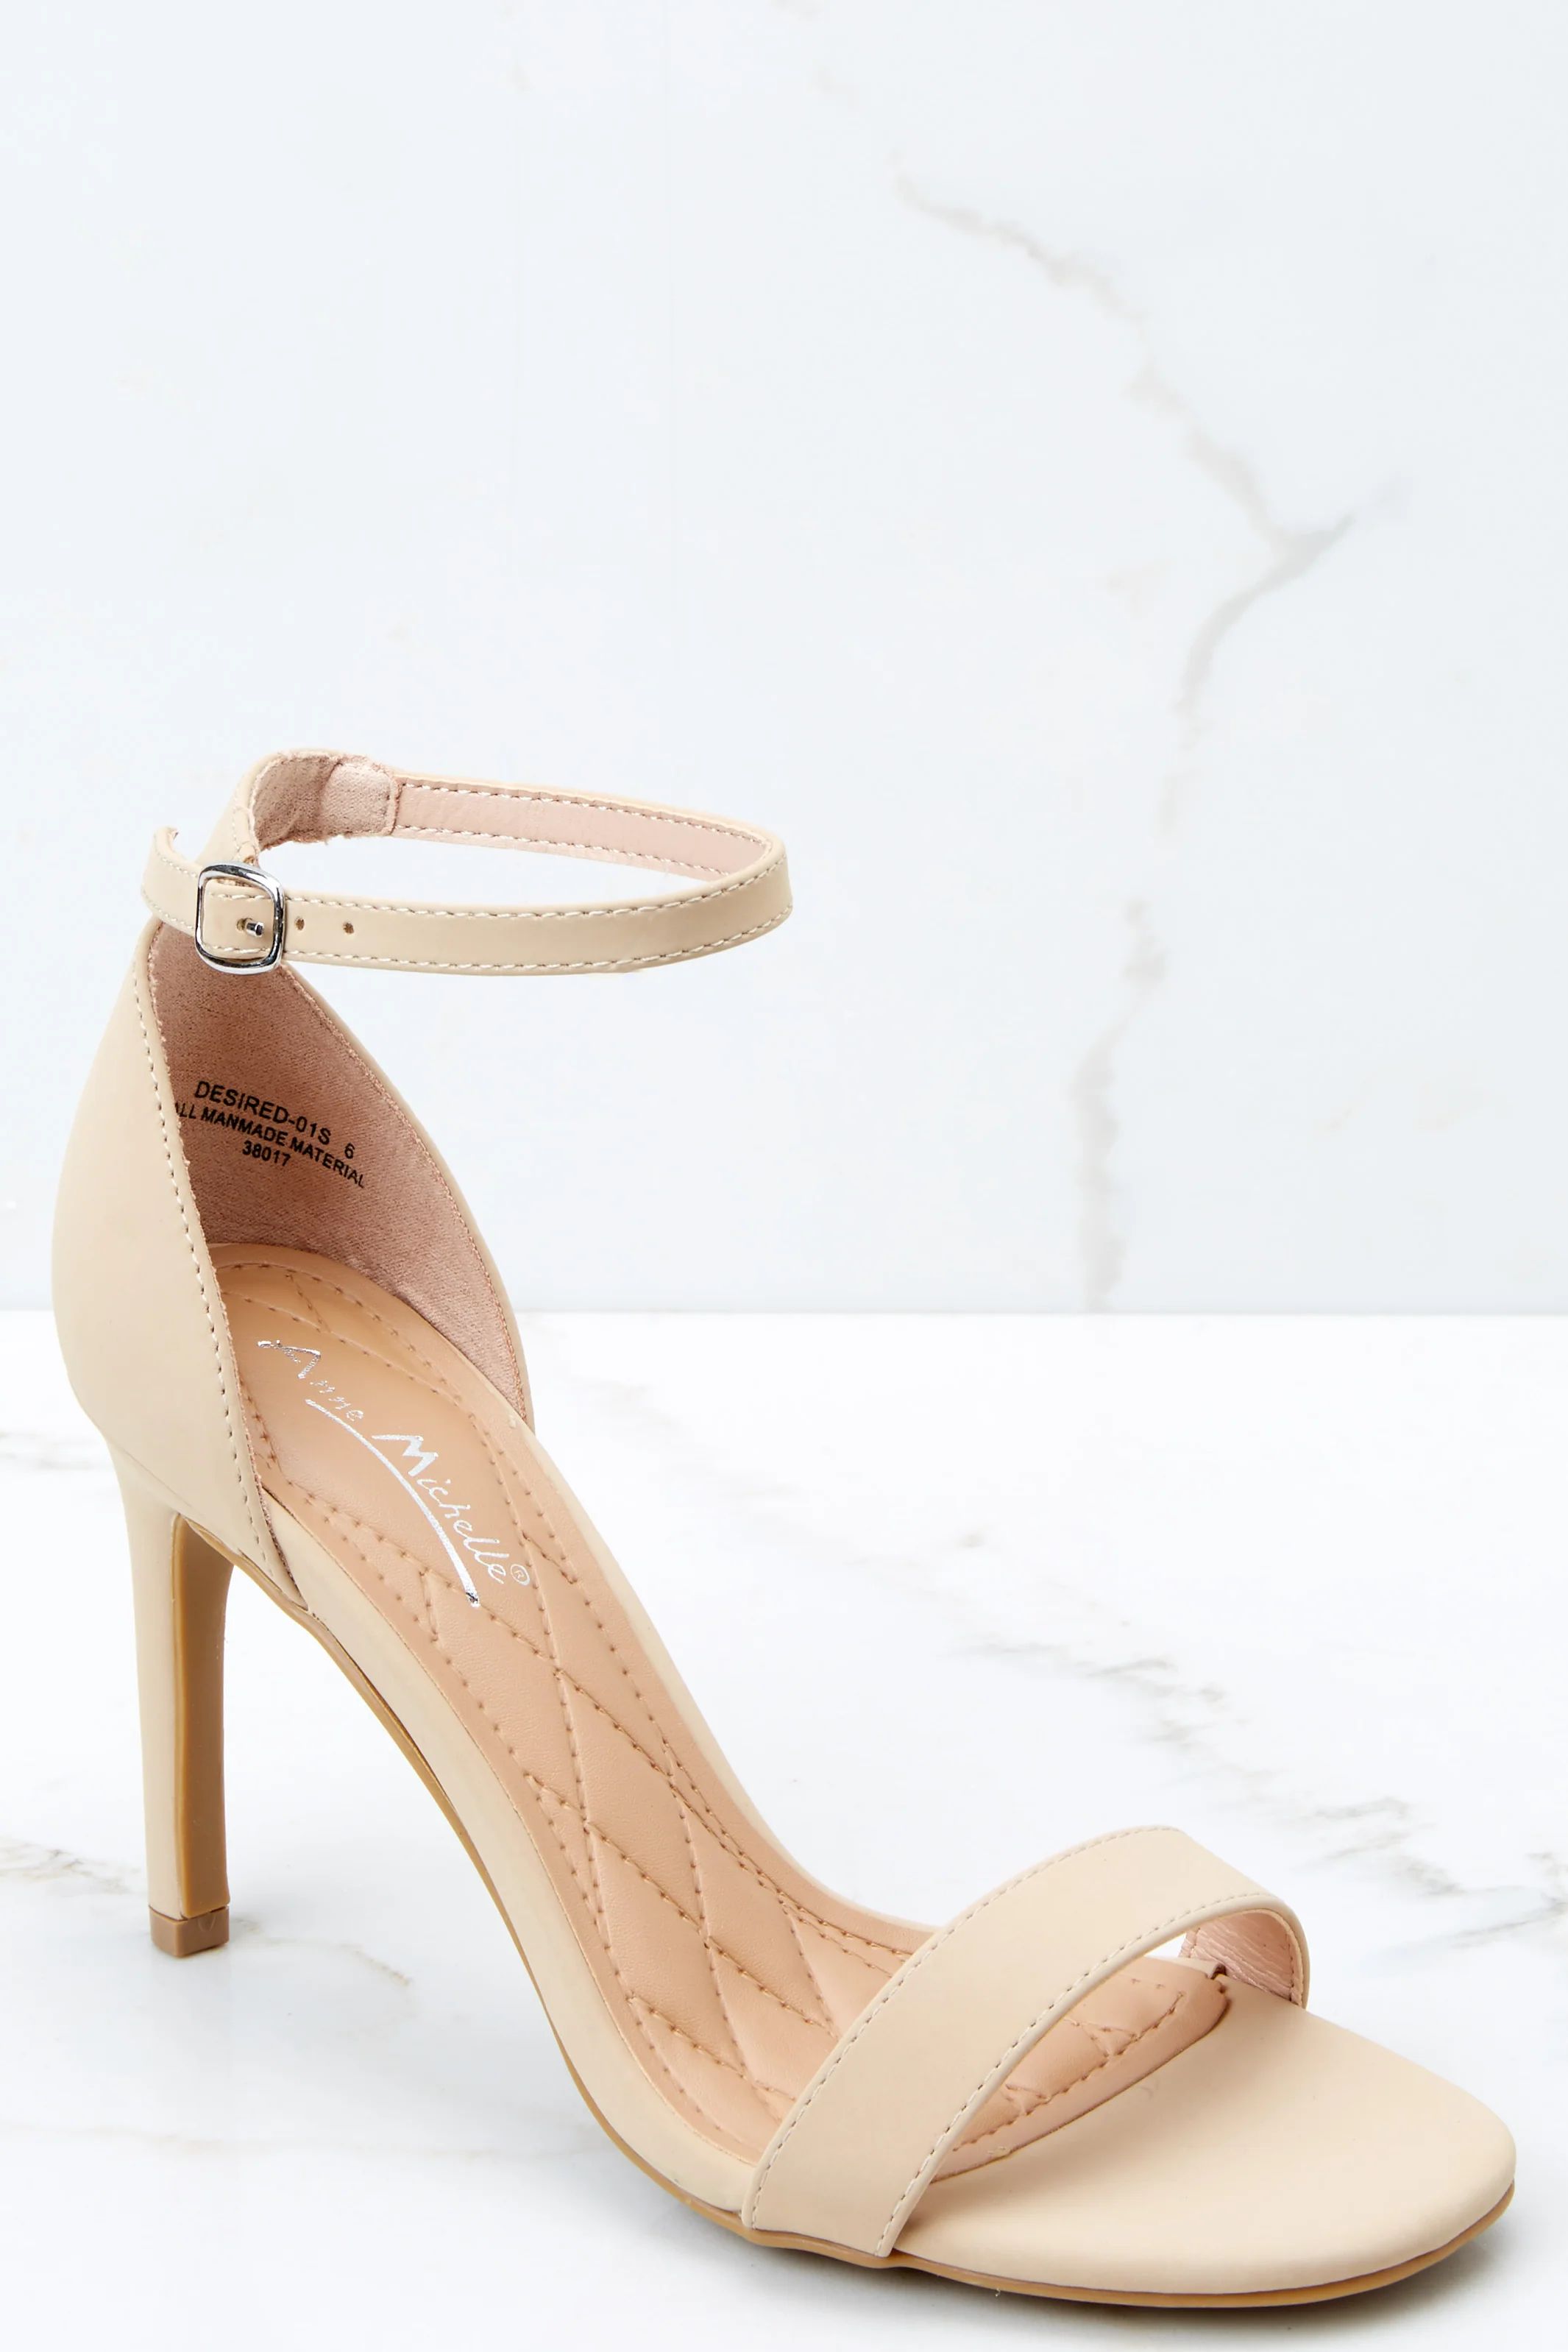 Unforgettable Steps Nude Ankle Strap Heels | Red Dress 